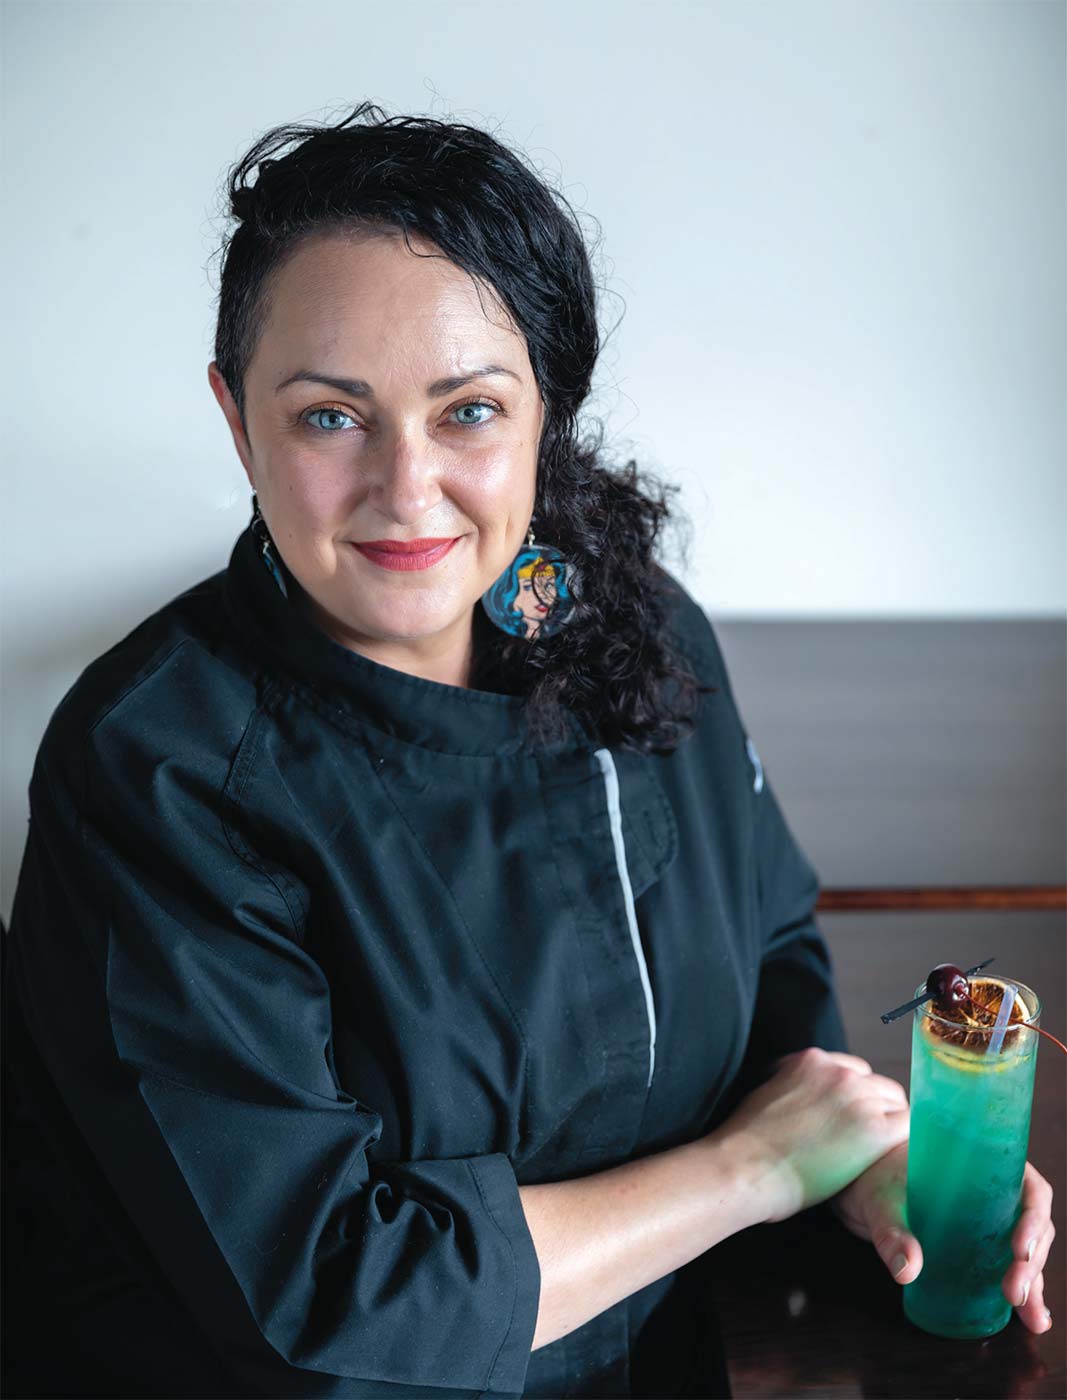 CHEF/OWNER SUZY SILVESTRE